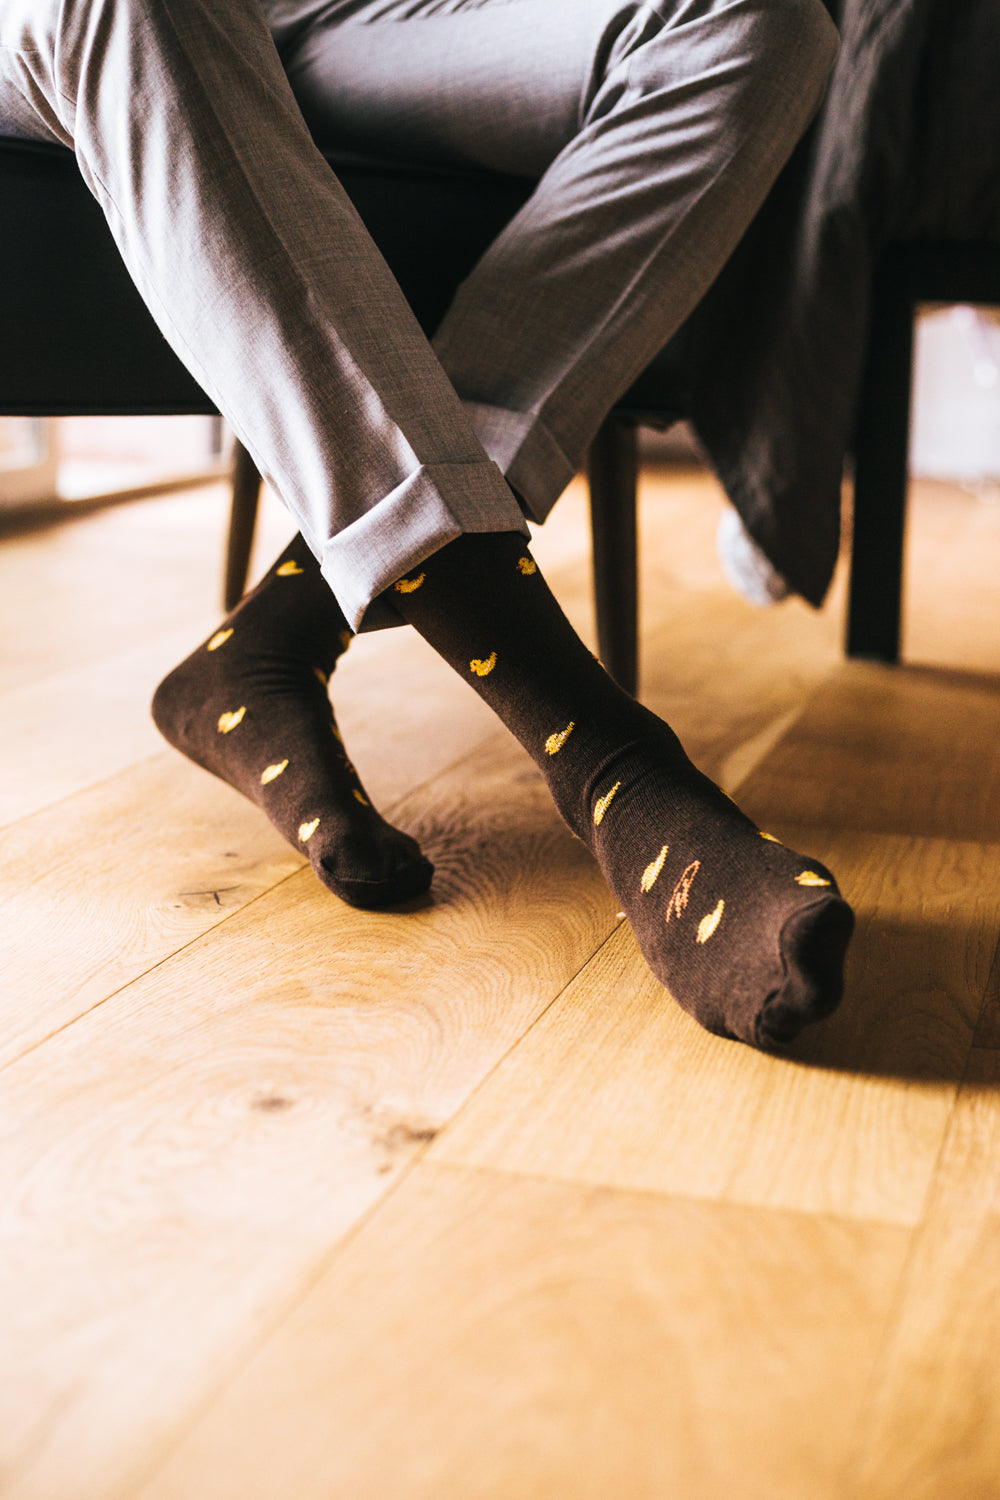 Why successful people wear Over the Calf socks